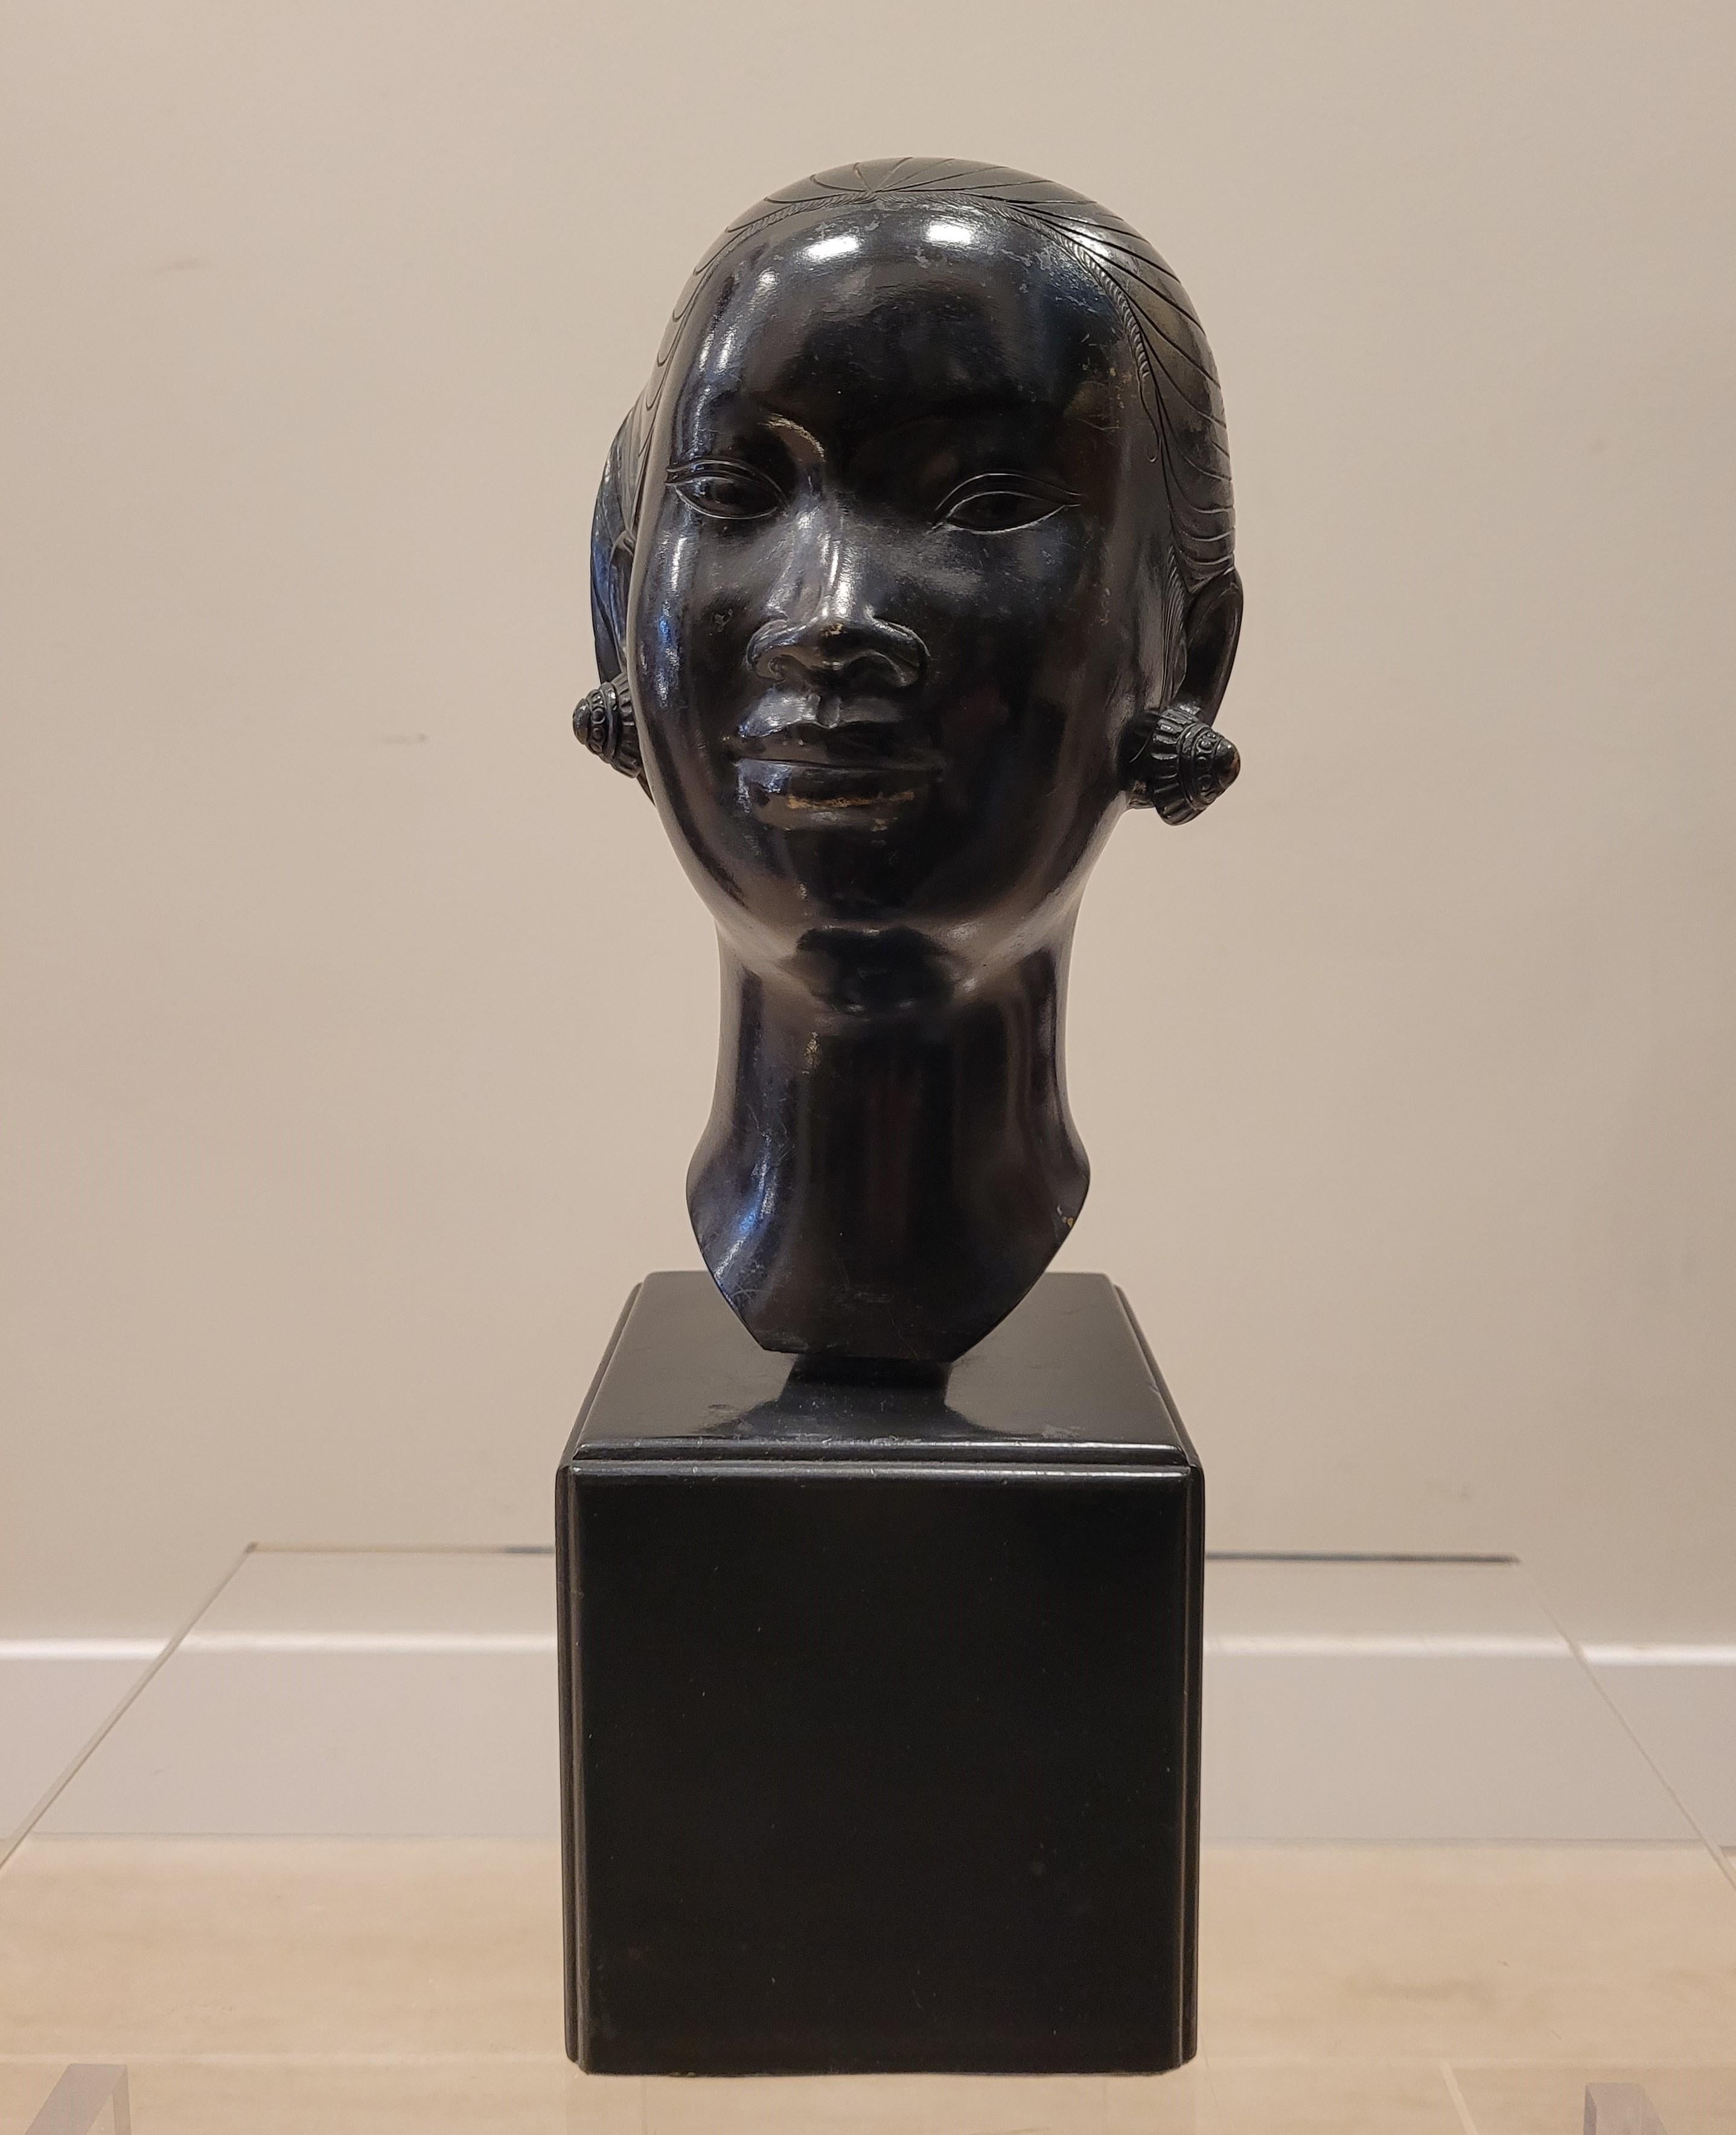 Gorgeous and evocative bust of a young Vietnamese (or Laotian, depending on the source) woman with her hair up. Made in Vietnam around 1950 by renowned artist Nguyen Thanh Le. Made of bronze with ebonized finish and wooden base. A naturalistic